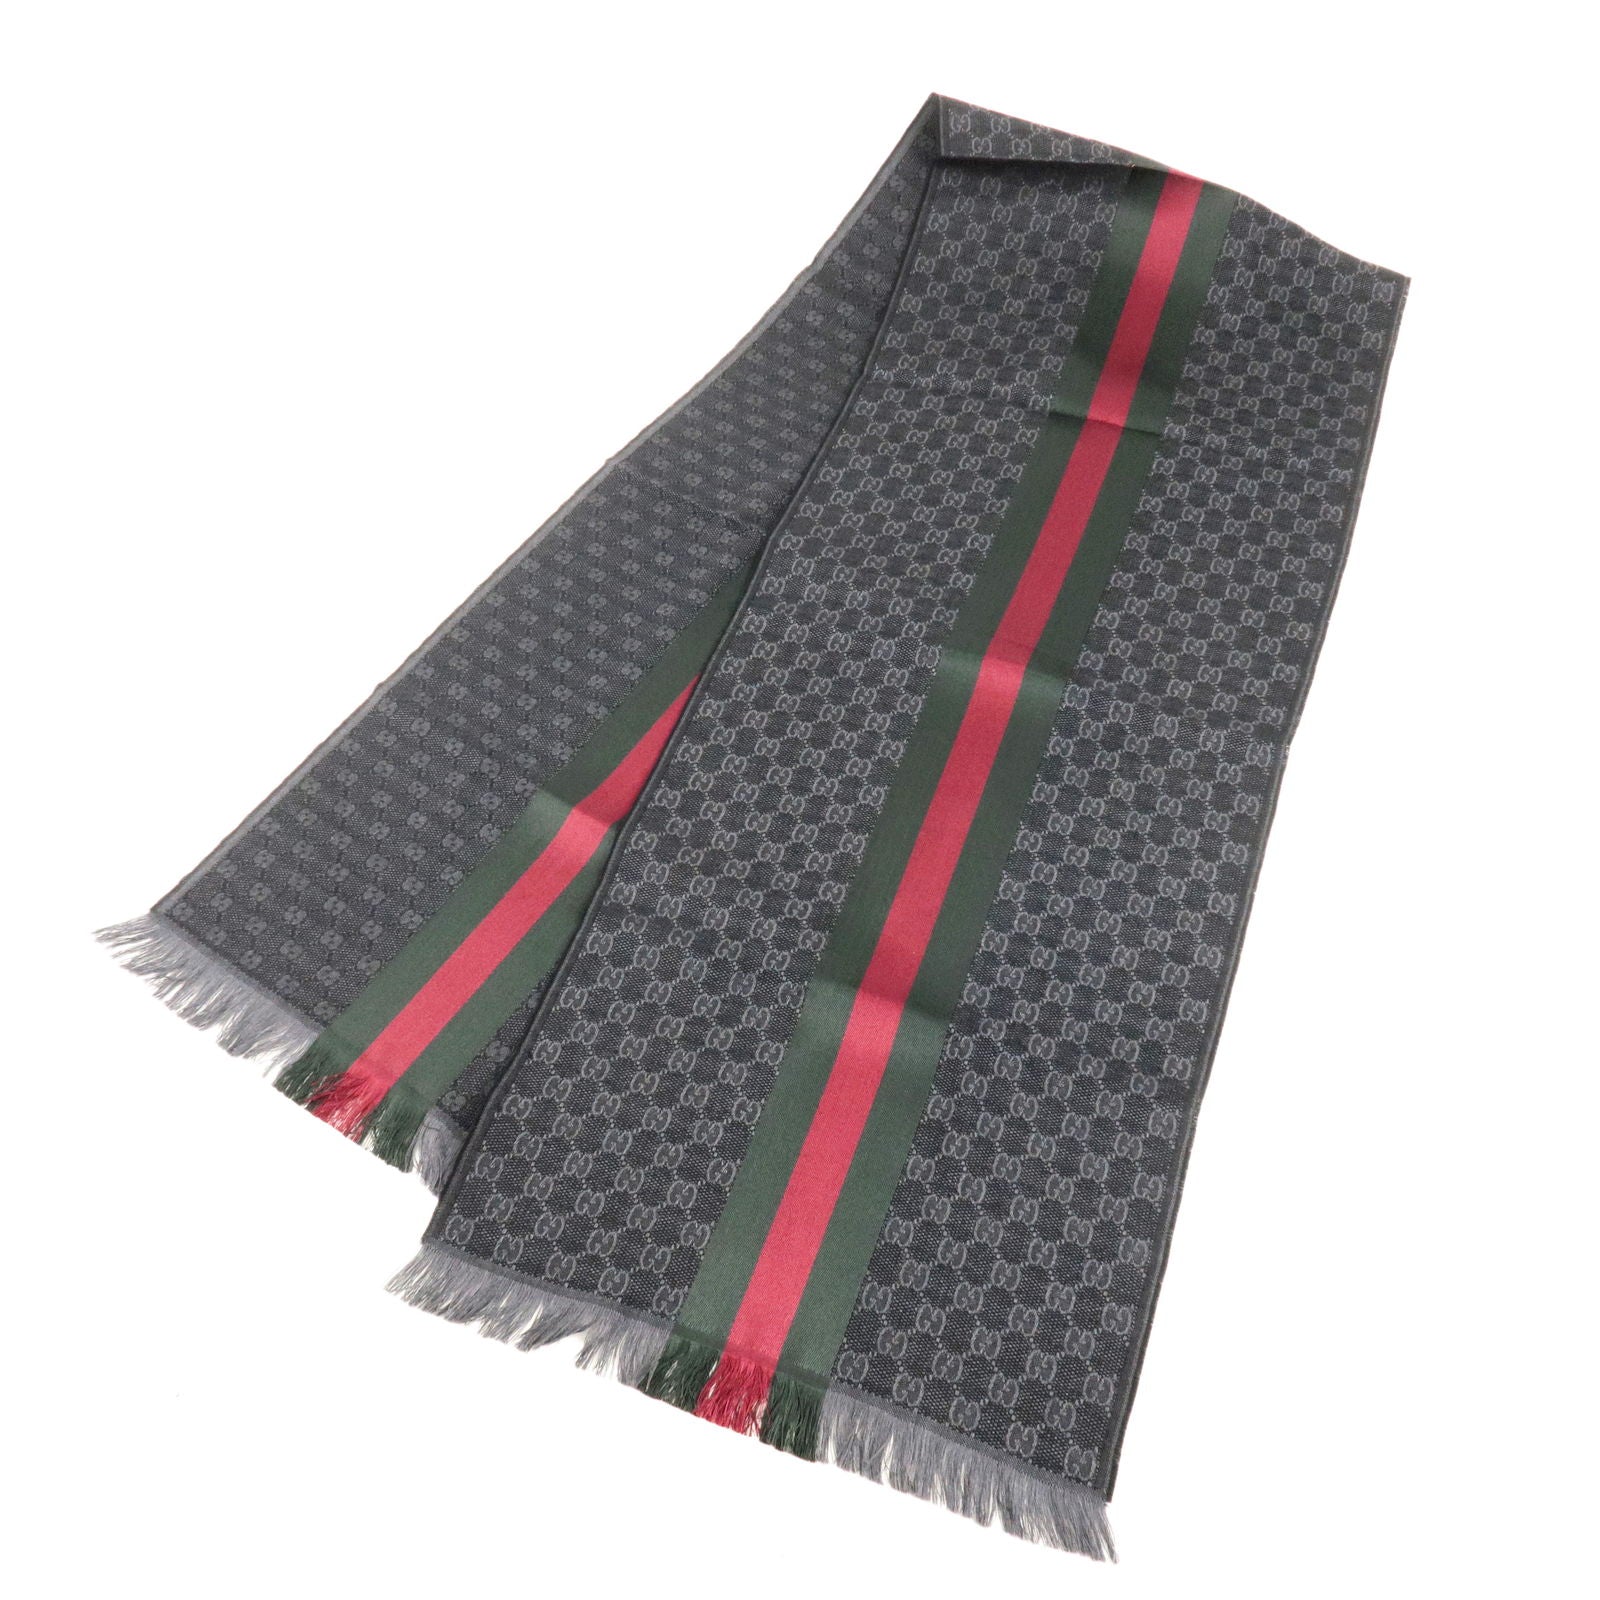 Sherry - 20% - Gray - 147351 – dct - for - GUCCI Princetown  475094-2C820-9151 - GG - Silk - Wool - 80% - GUCCI - Men - ep_vintage  luxury Store - Scarf